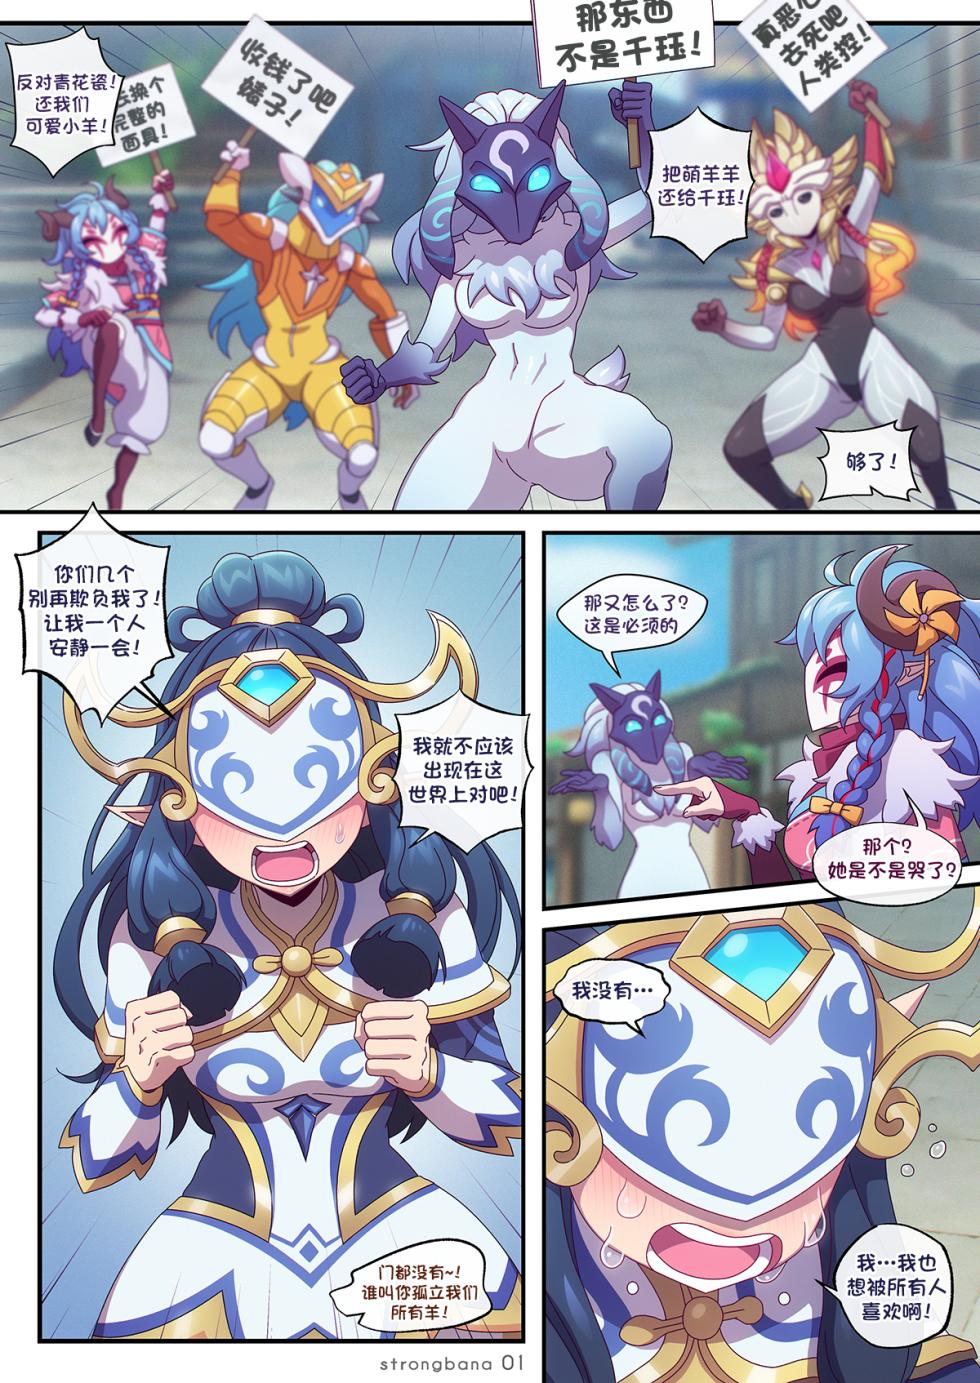 [Strong Bana] Kindred (League of legends) [79%汉化组] - Page 2